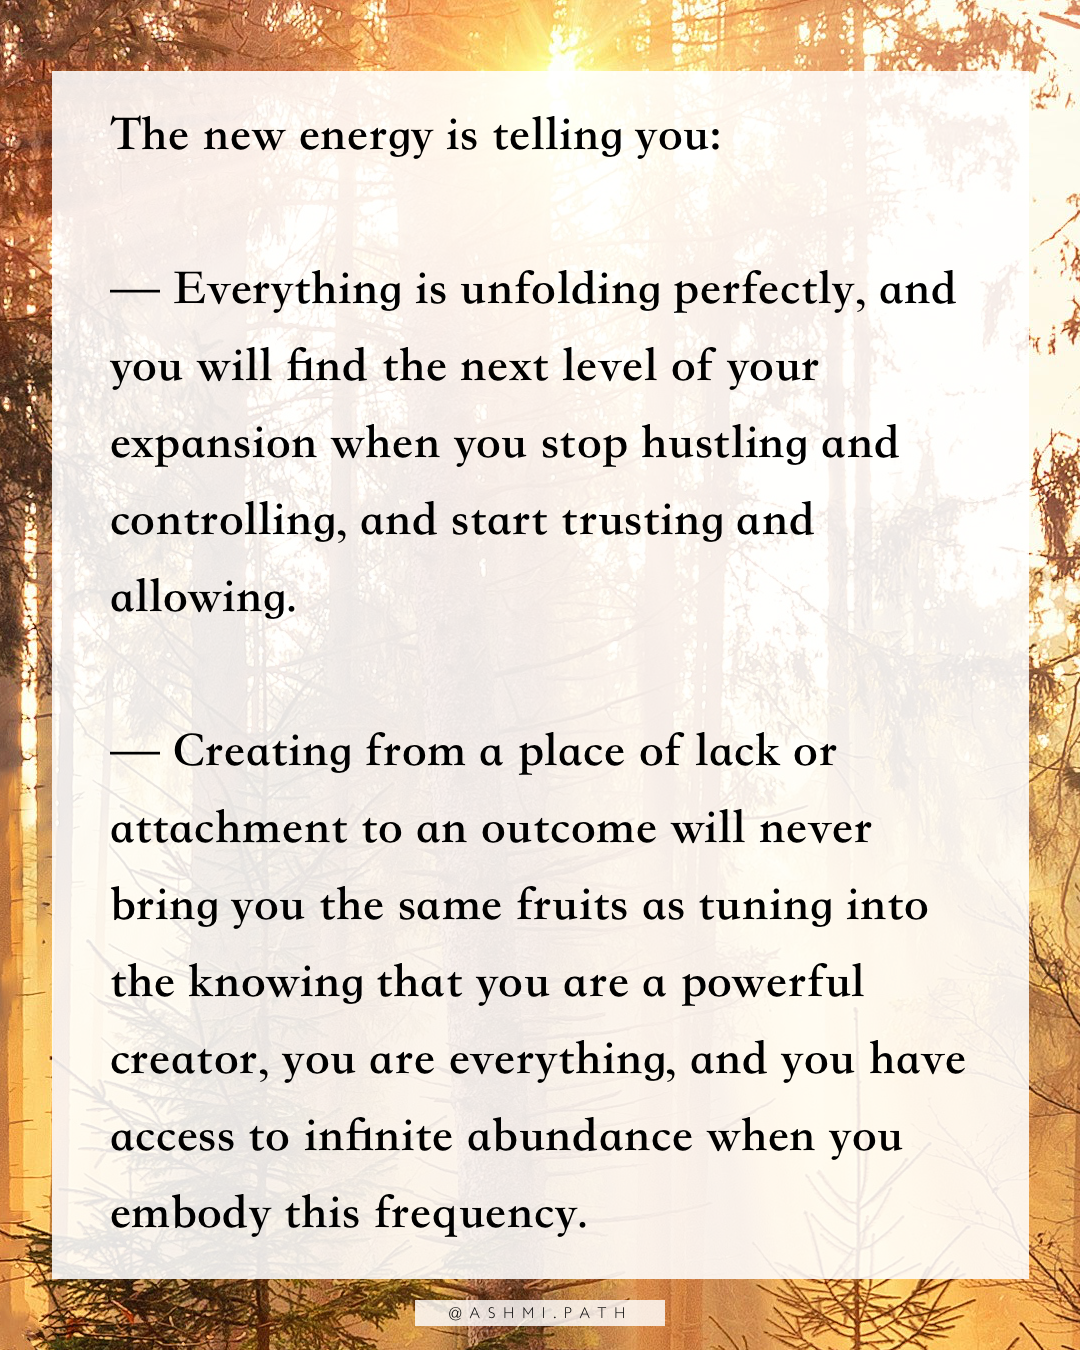 You're Not Lazy, You're Dissolving Your Attachment to Doing [+ Upcoming Ceremony]